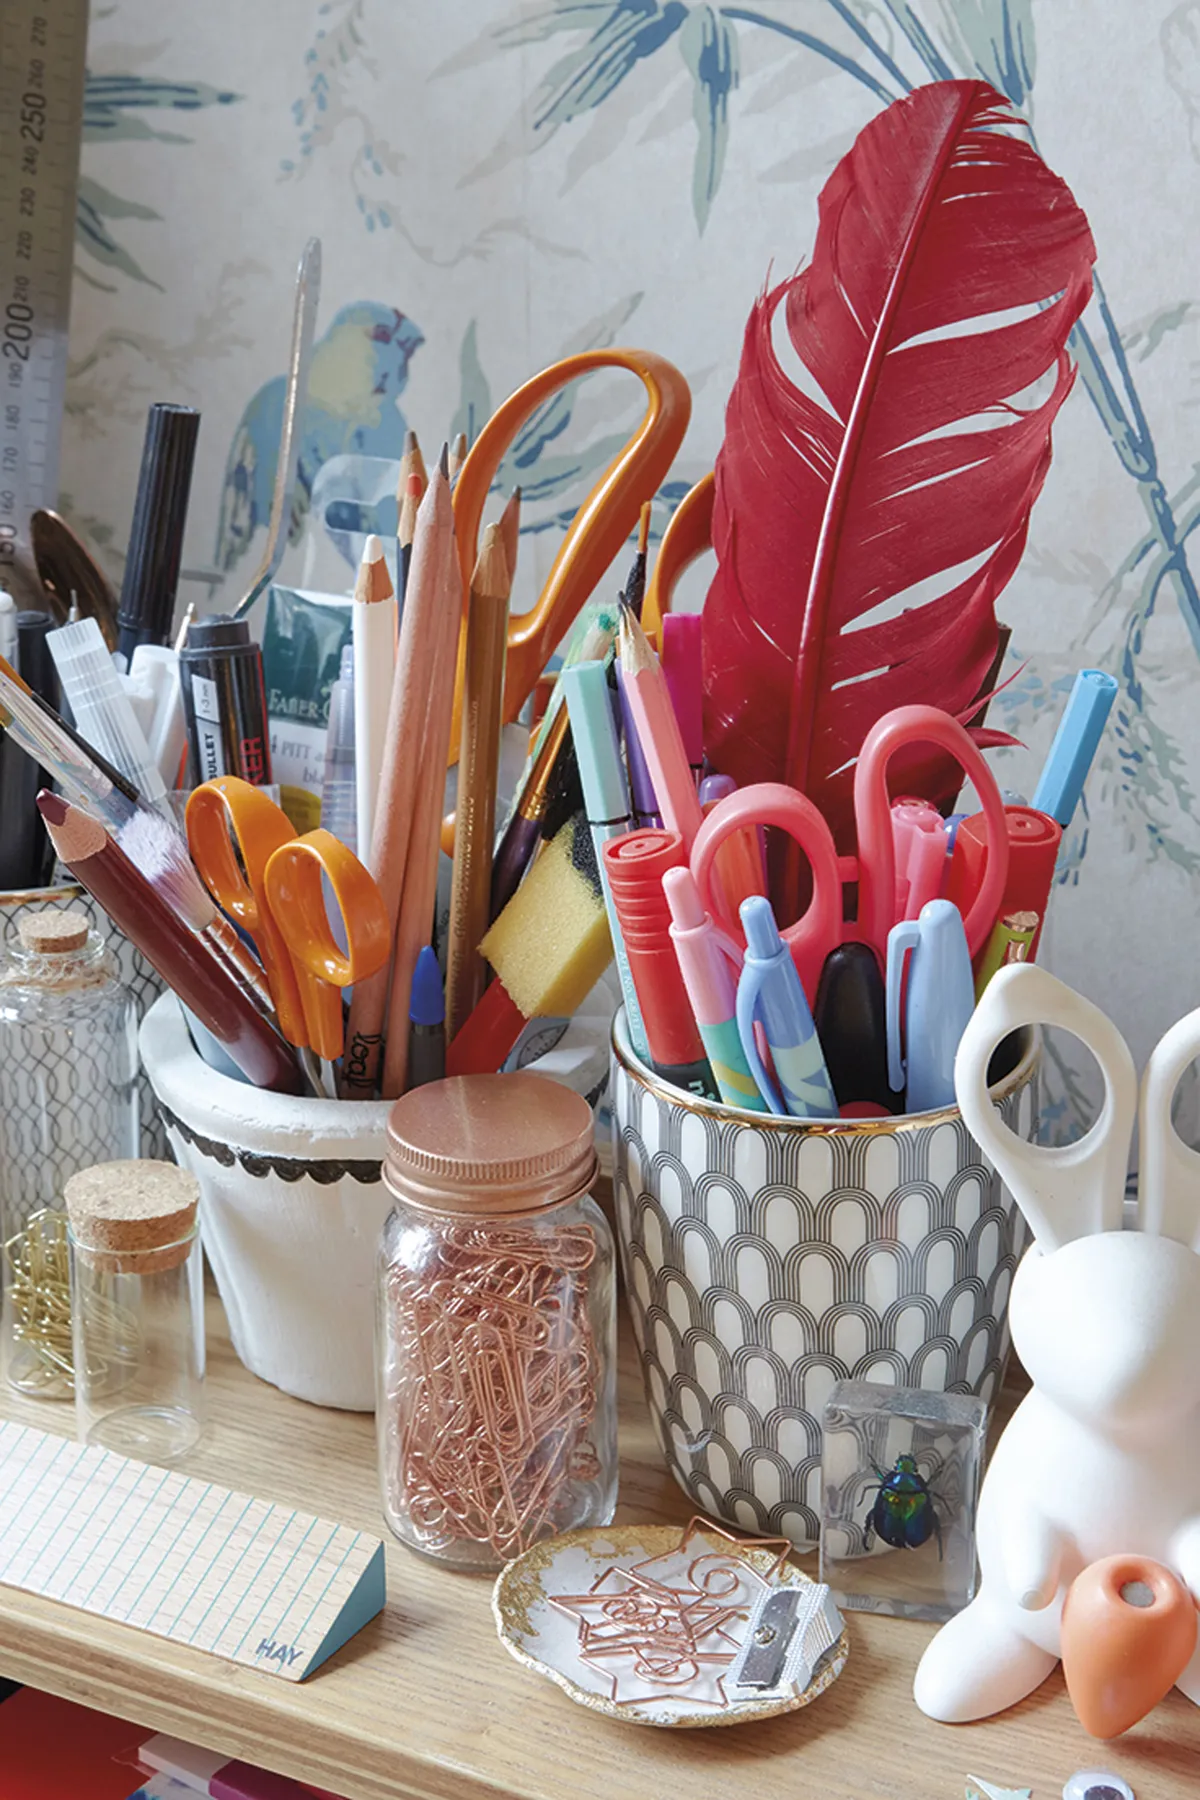 Emily’s desk holds an assorted mix of craft equipment. ‘I teach calligraphy and brush lettering, so I have a lot of quills, ink and pens,’ says Emily